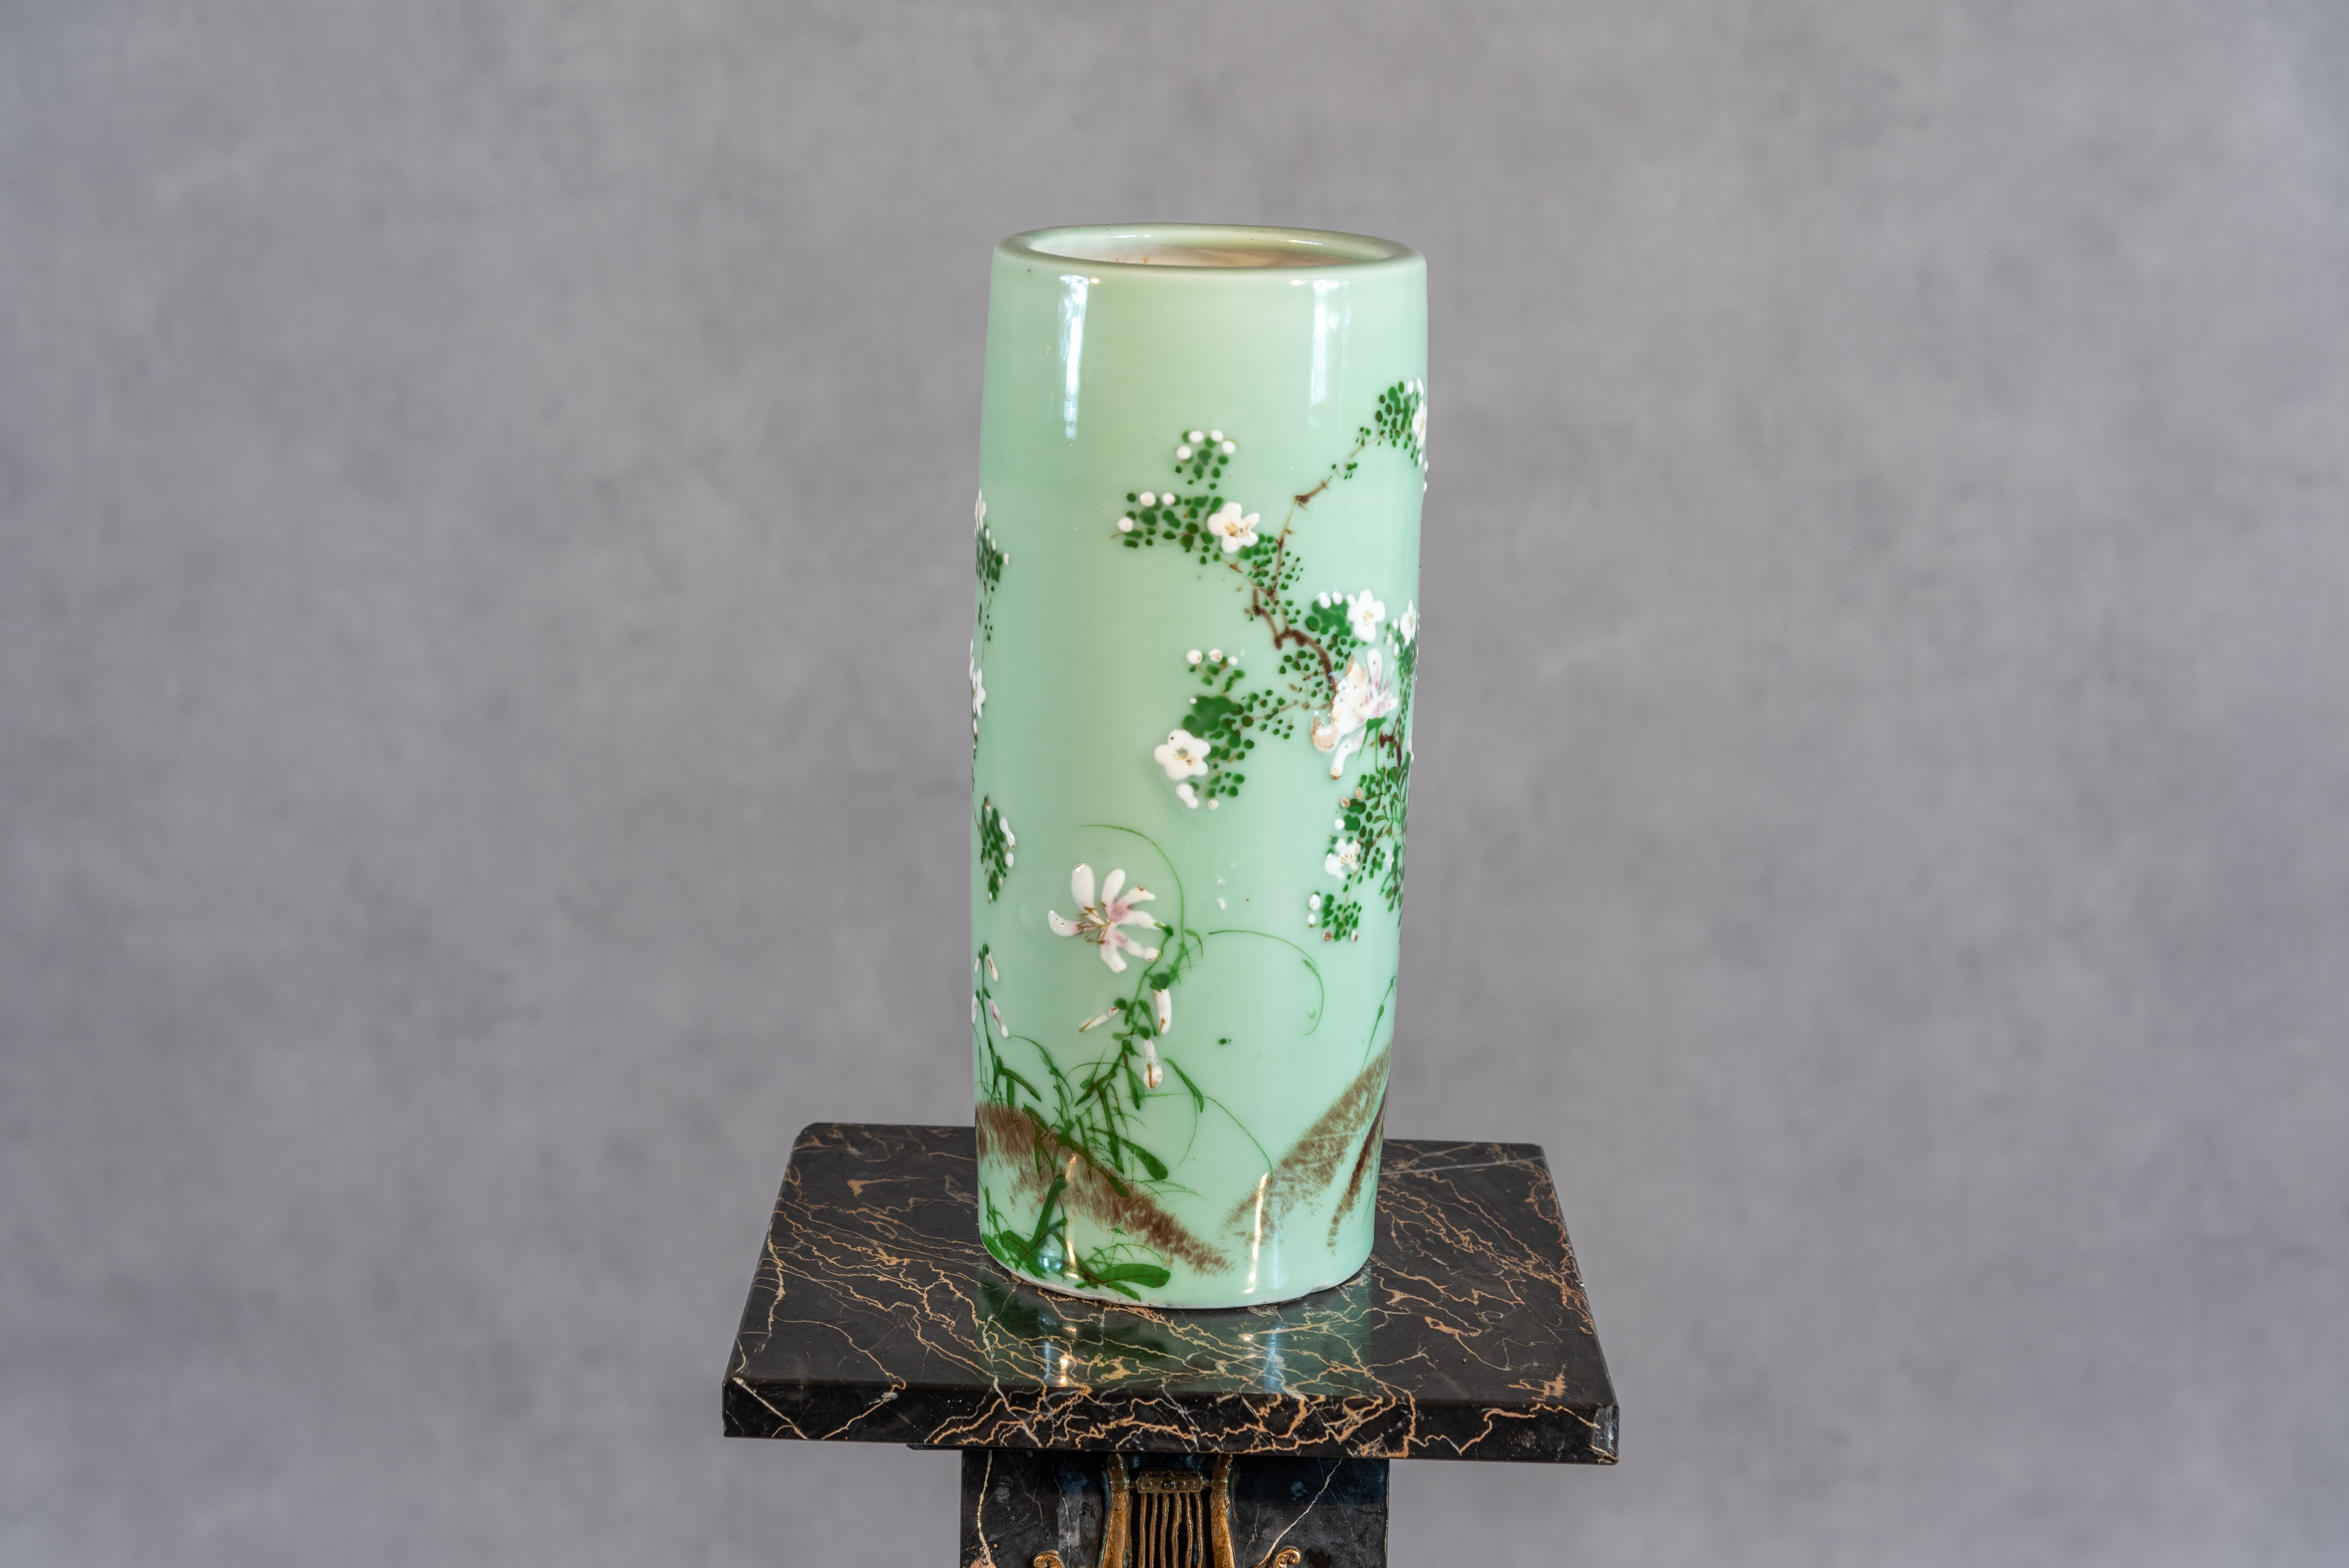 
This Tall 20th Century Celadon Vase is a graceful testament to the artistry of the 20th century. Crafted with meticulous detail, the celadon glaze imparts a soft, soothing green hue, providing a backdrop for delicate floral decorations. The